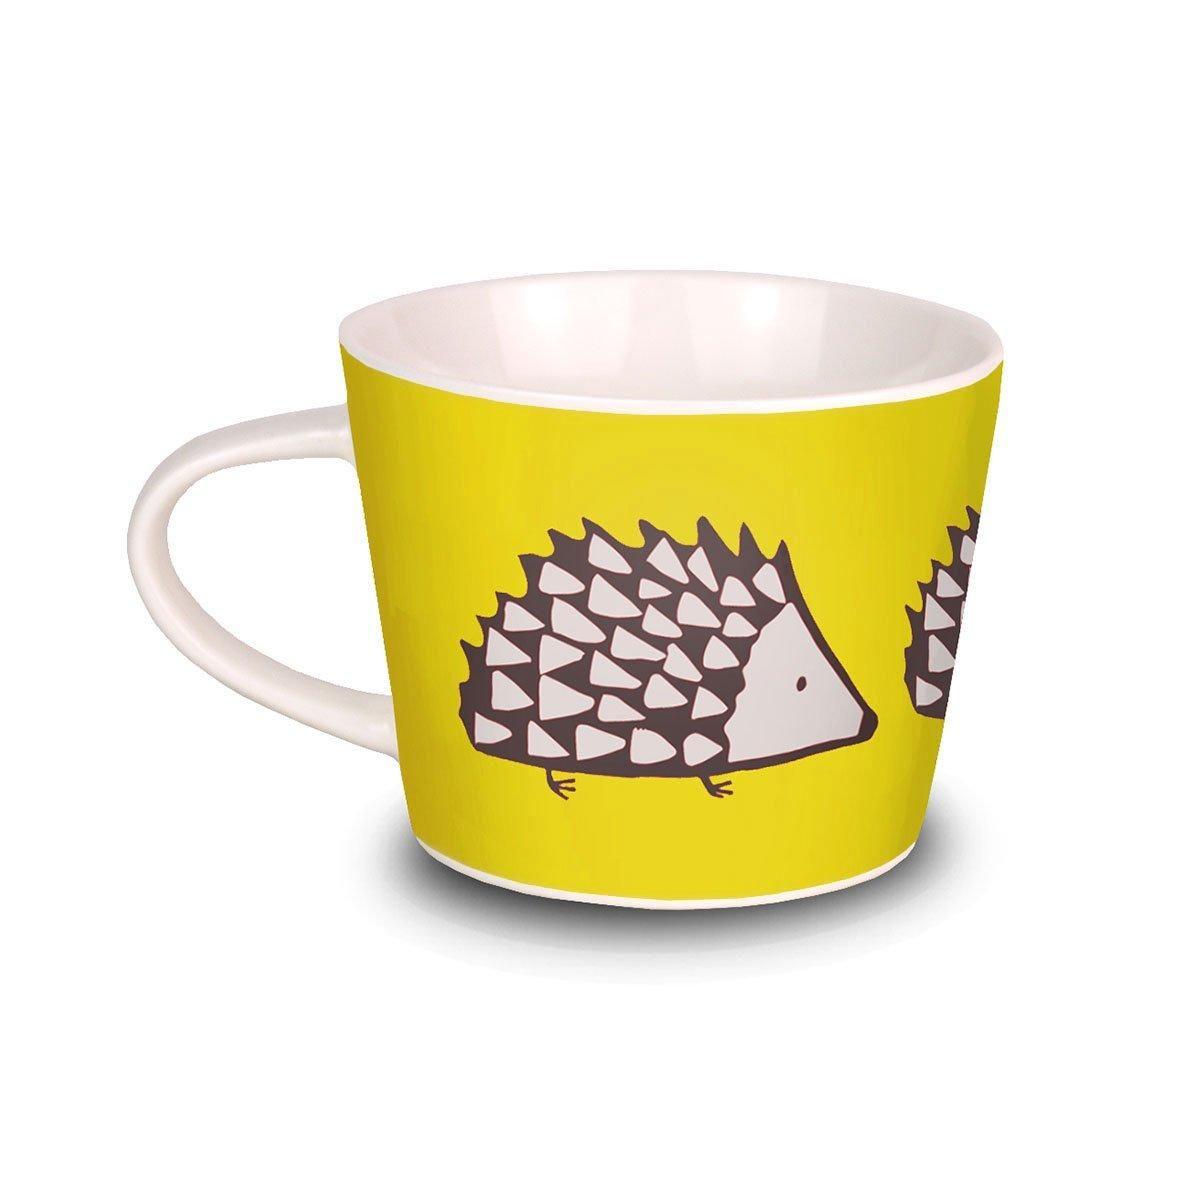  Mugs And Cups SC-0123 